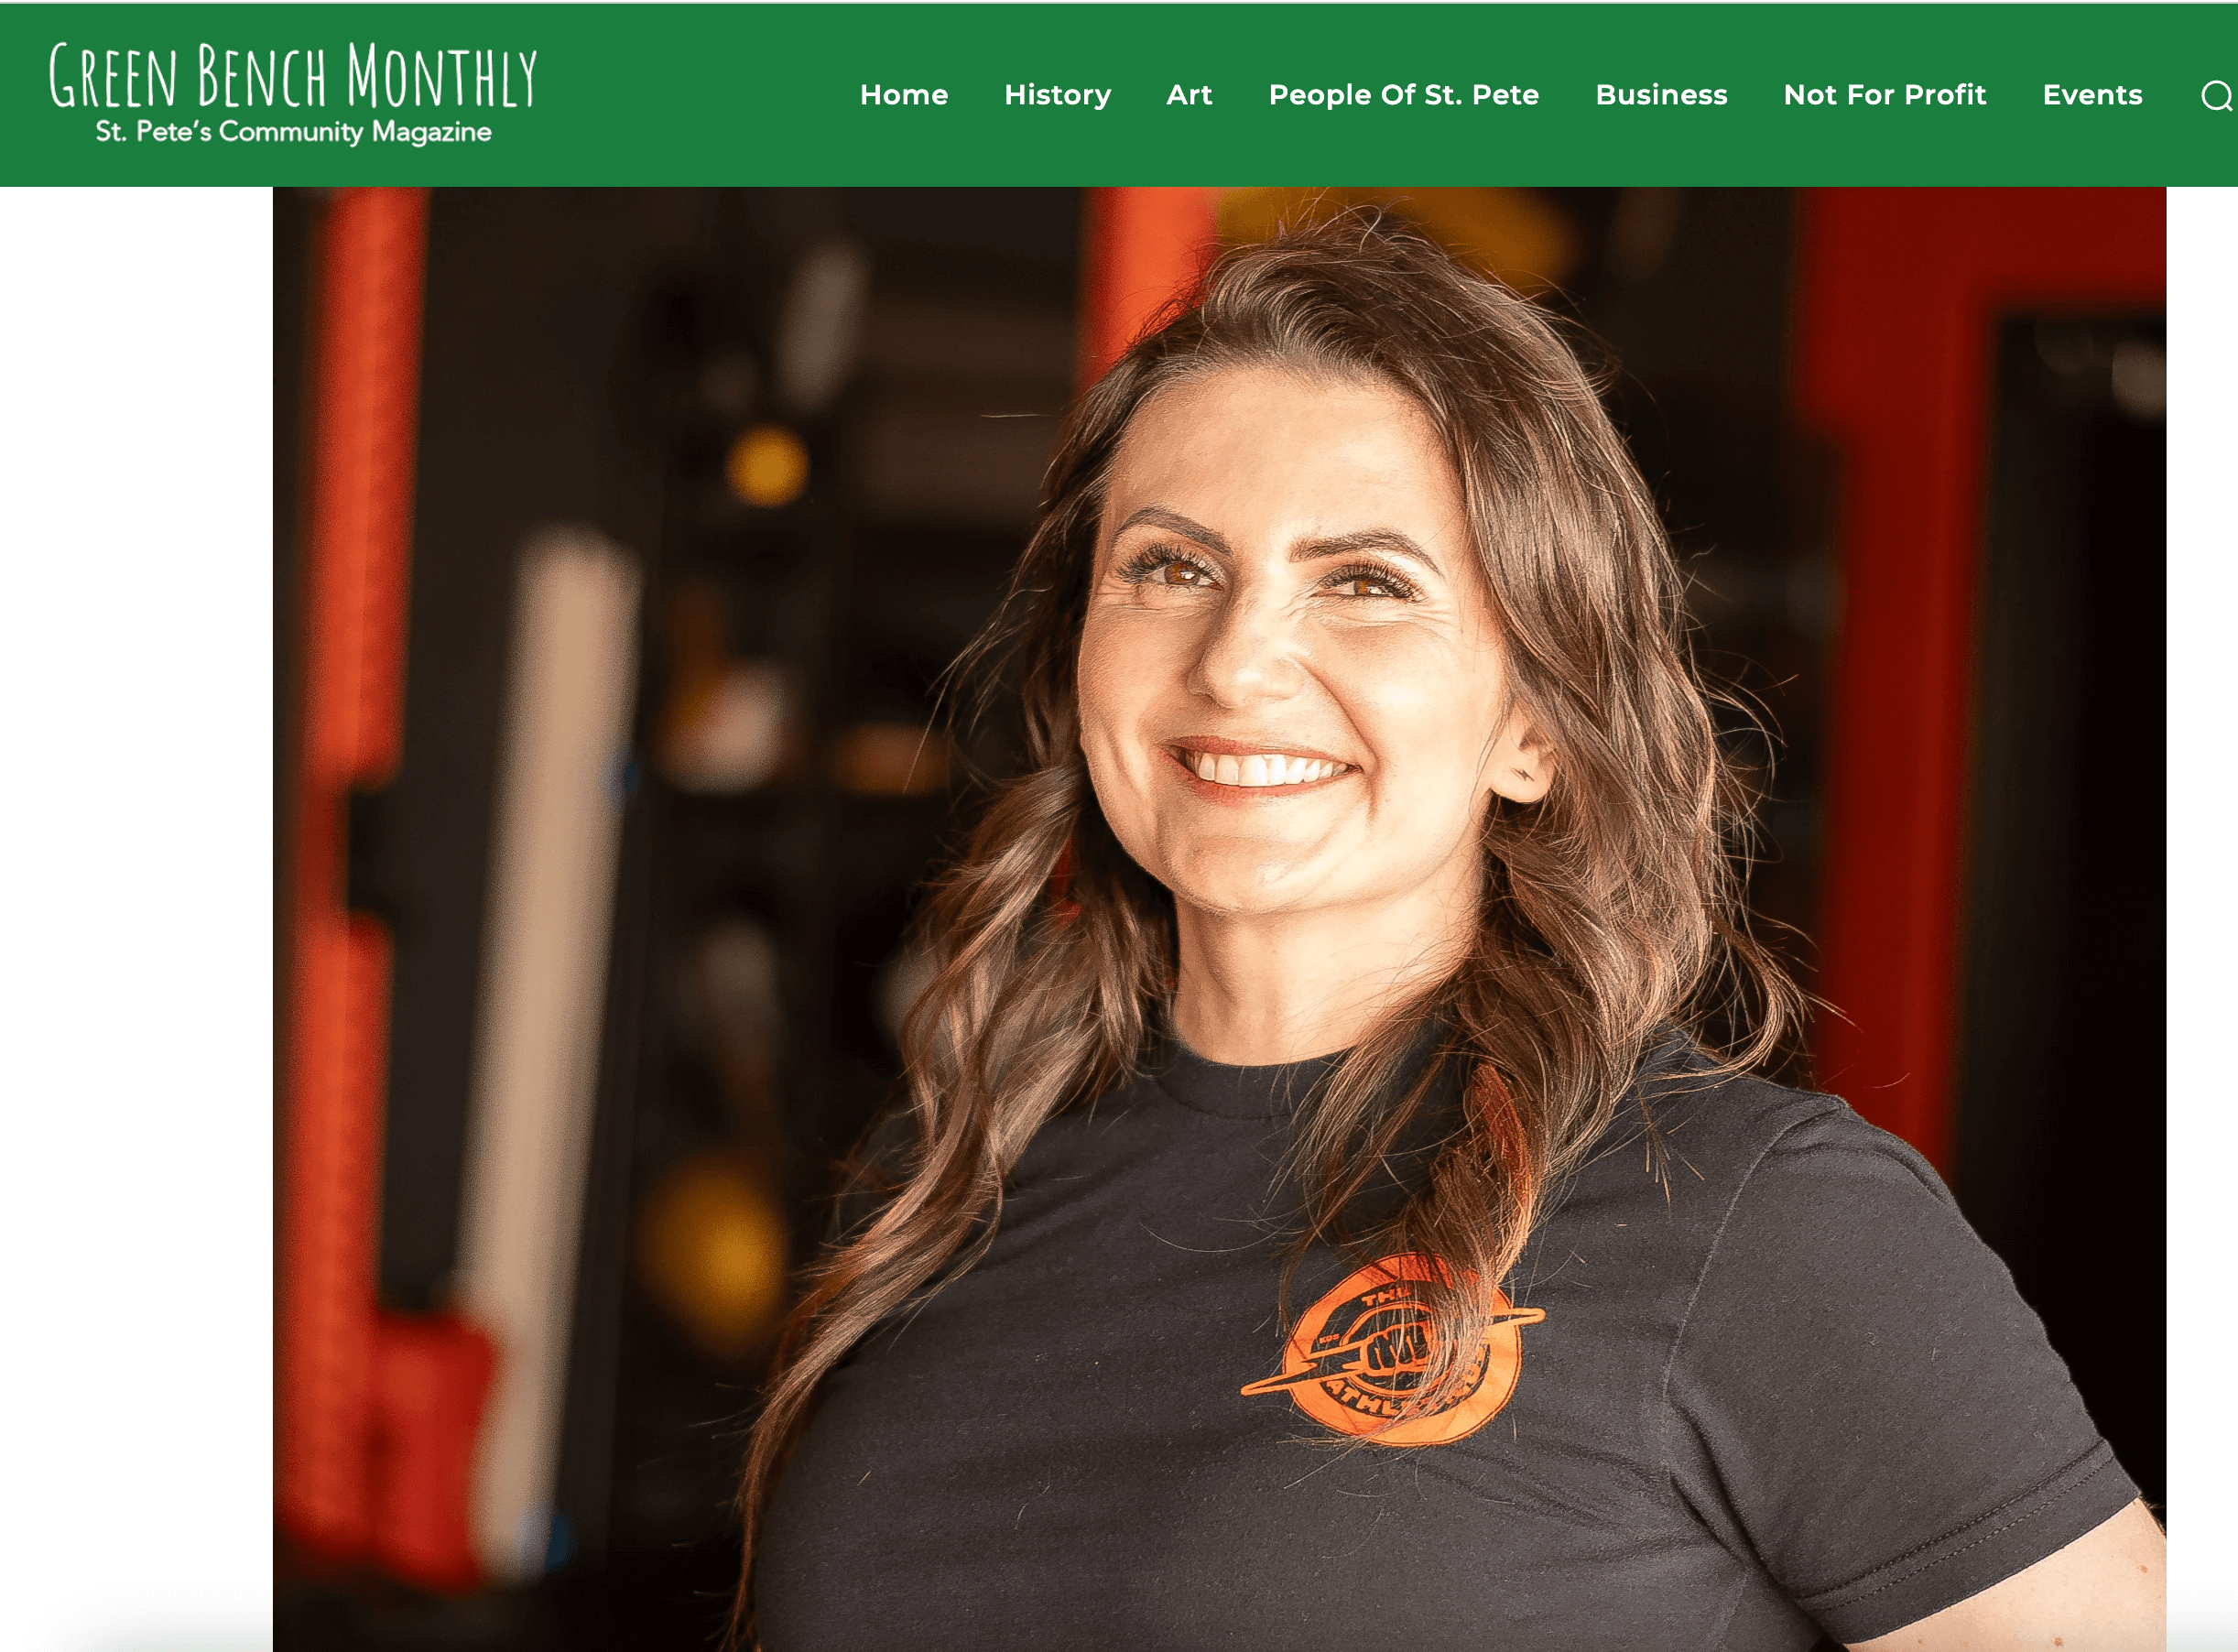 Olya Schaefer, the founder of The Athleticus Personal Training Studio, in Green Bench Monthly